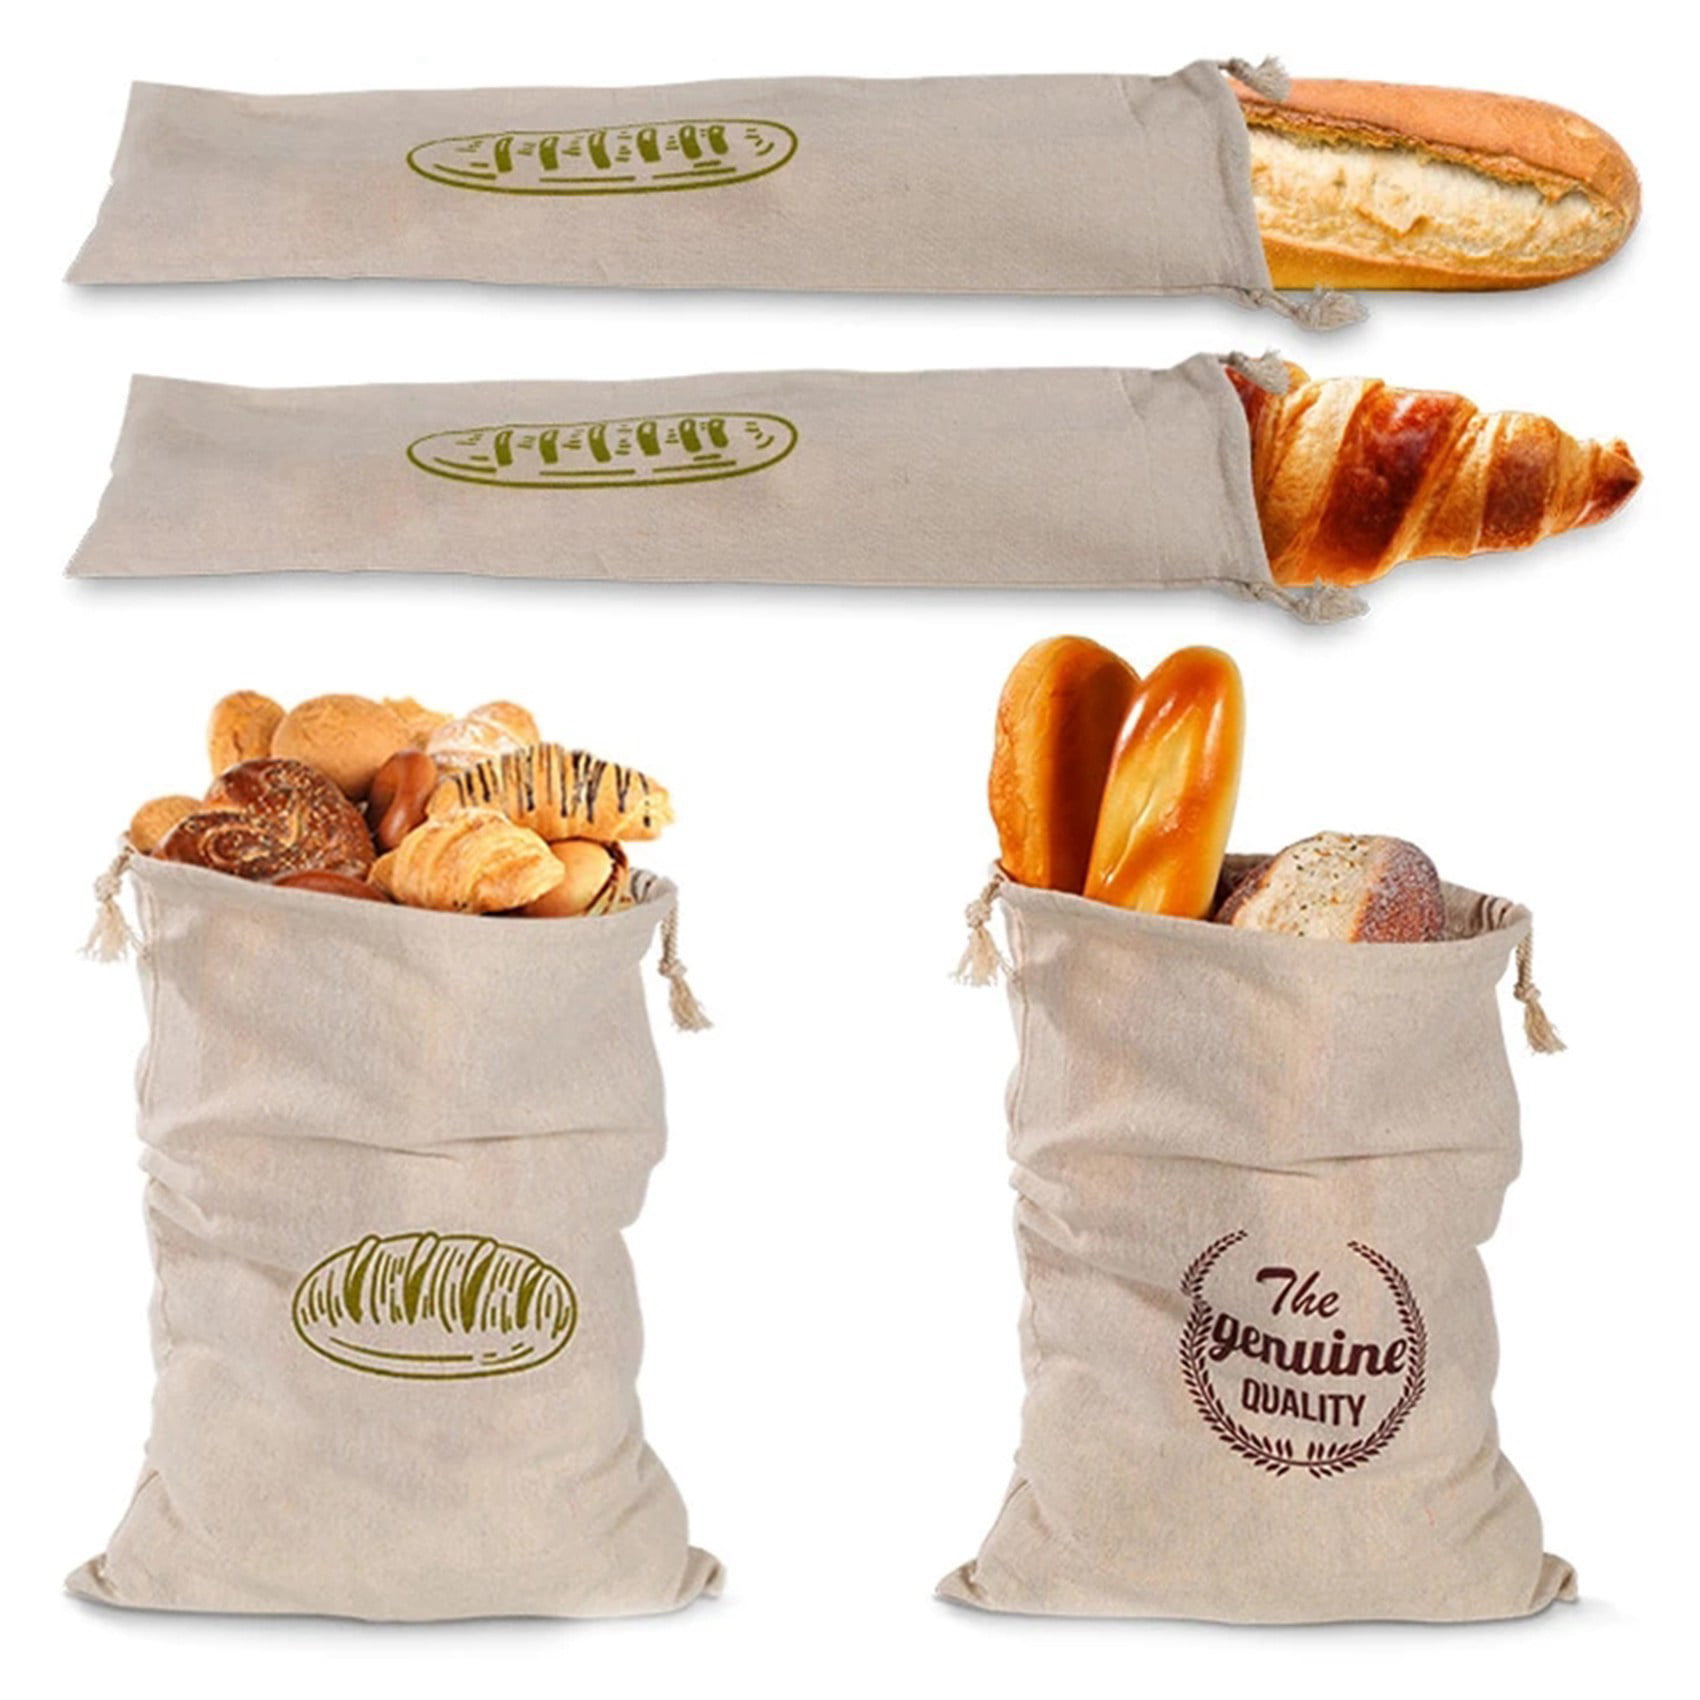 personalized and reusable bag eco-friendly bags Storage bag hanging bag bread bag drawstring pouch